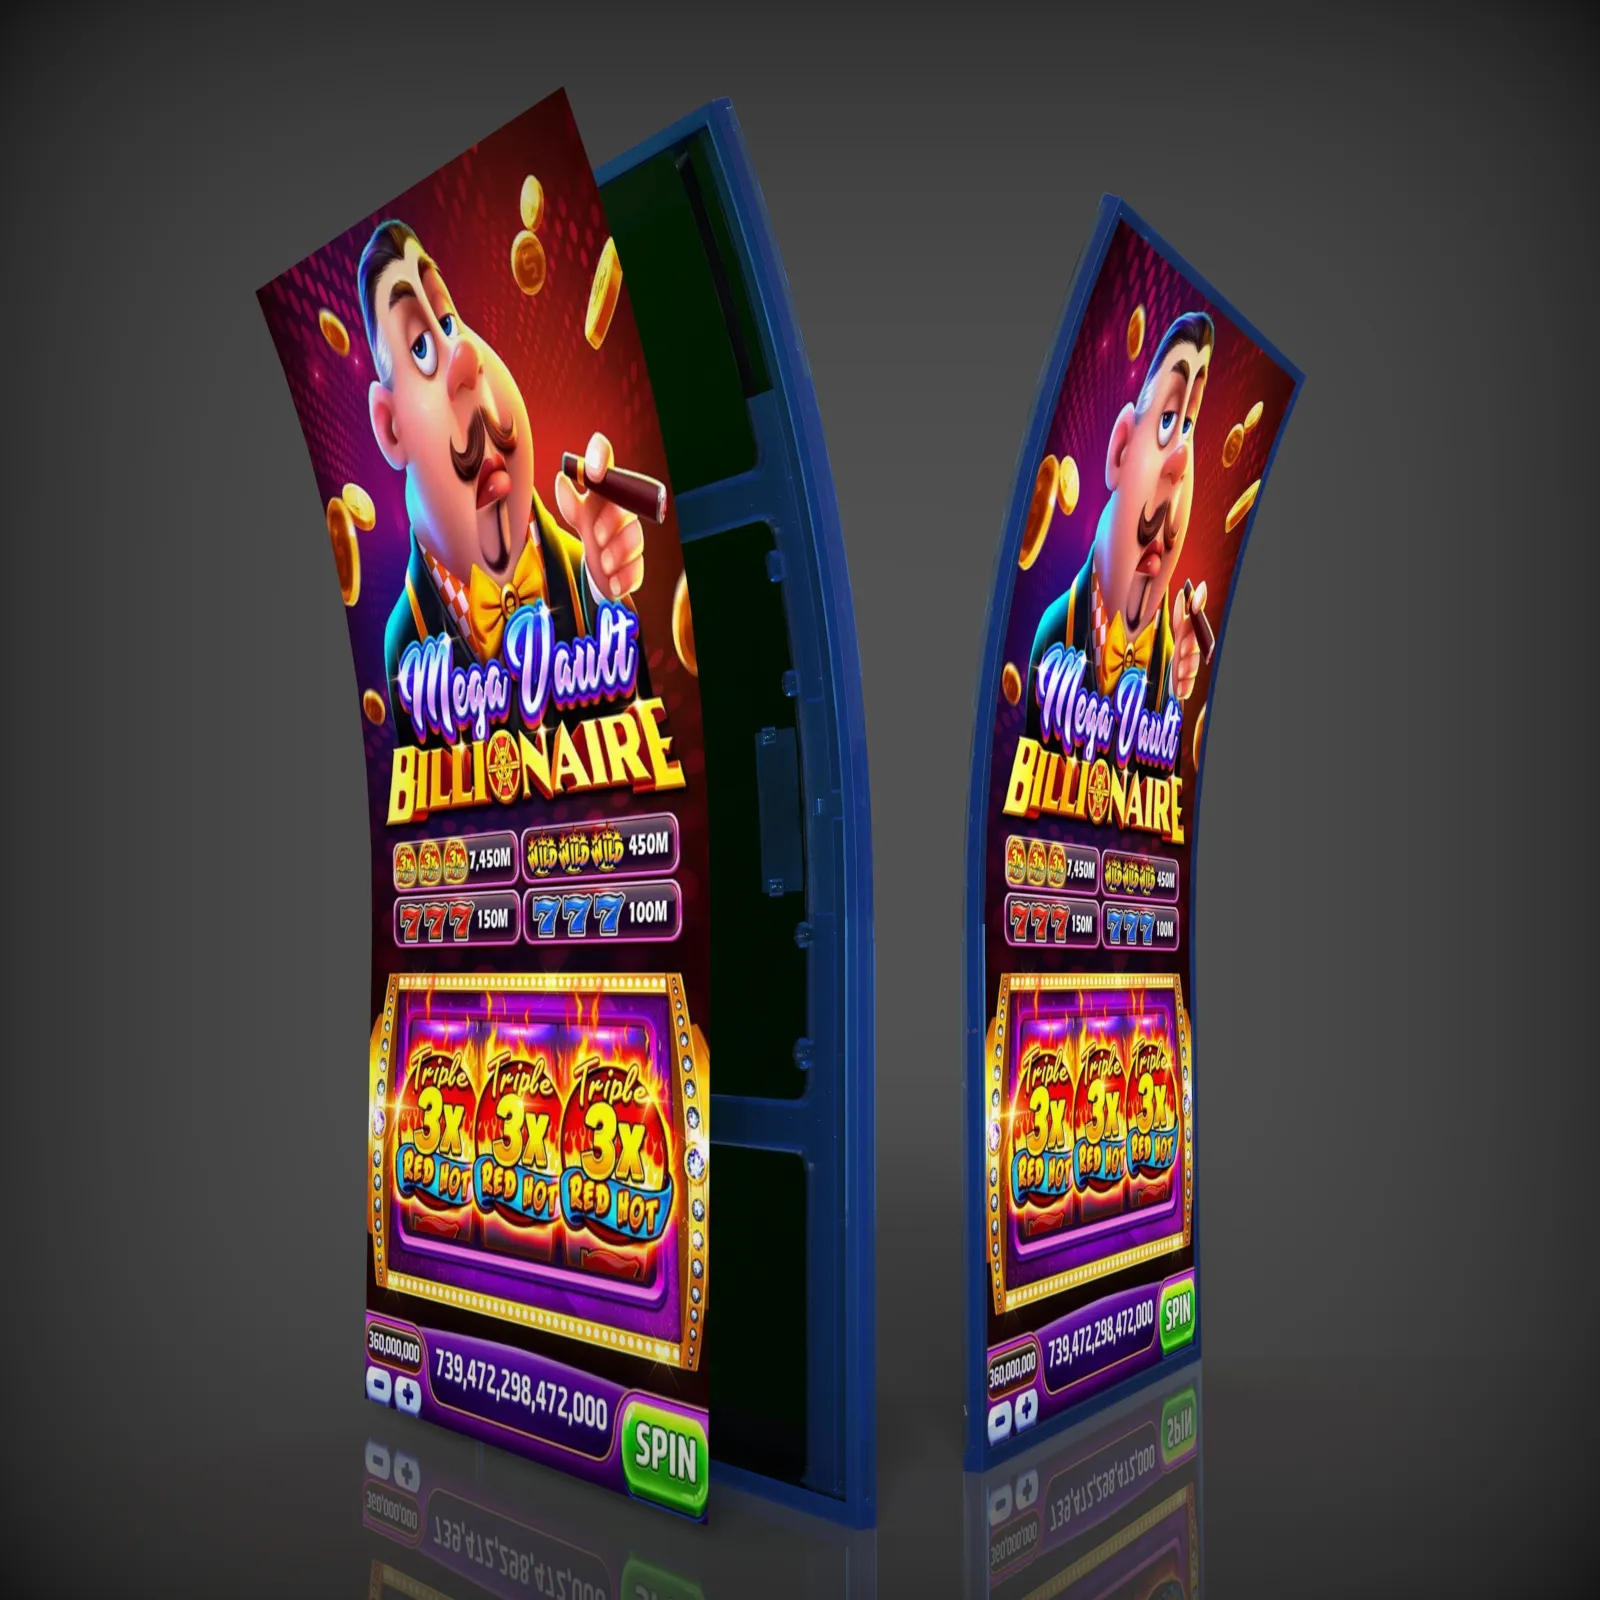 43-inch J-shaped touchscreen gaming display for casinos